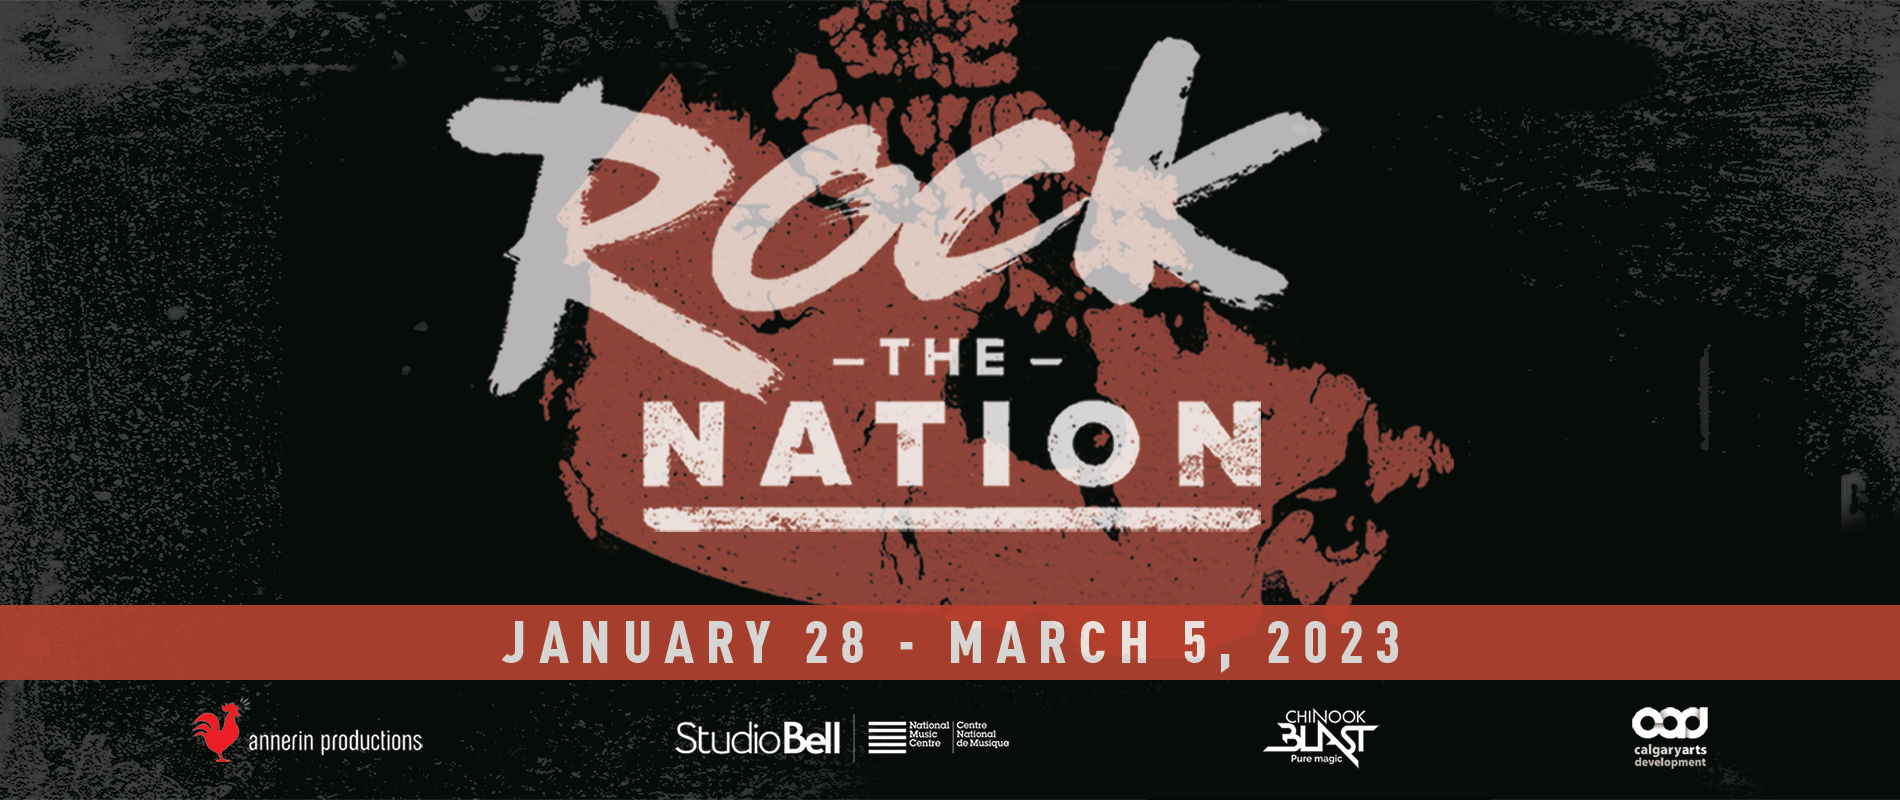 National Music Centre and Annerin Productions Bring Rock the Nation Musical Revue to Studio Bell, from January 28-March 5